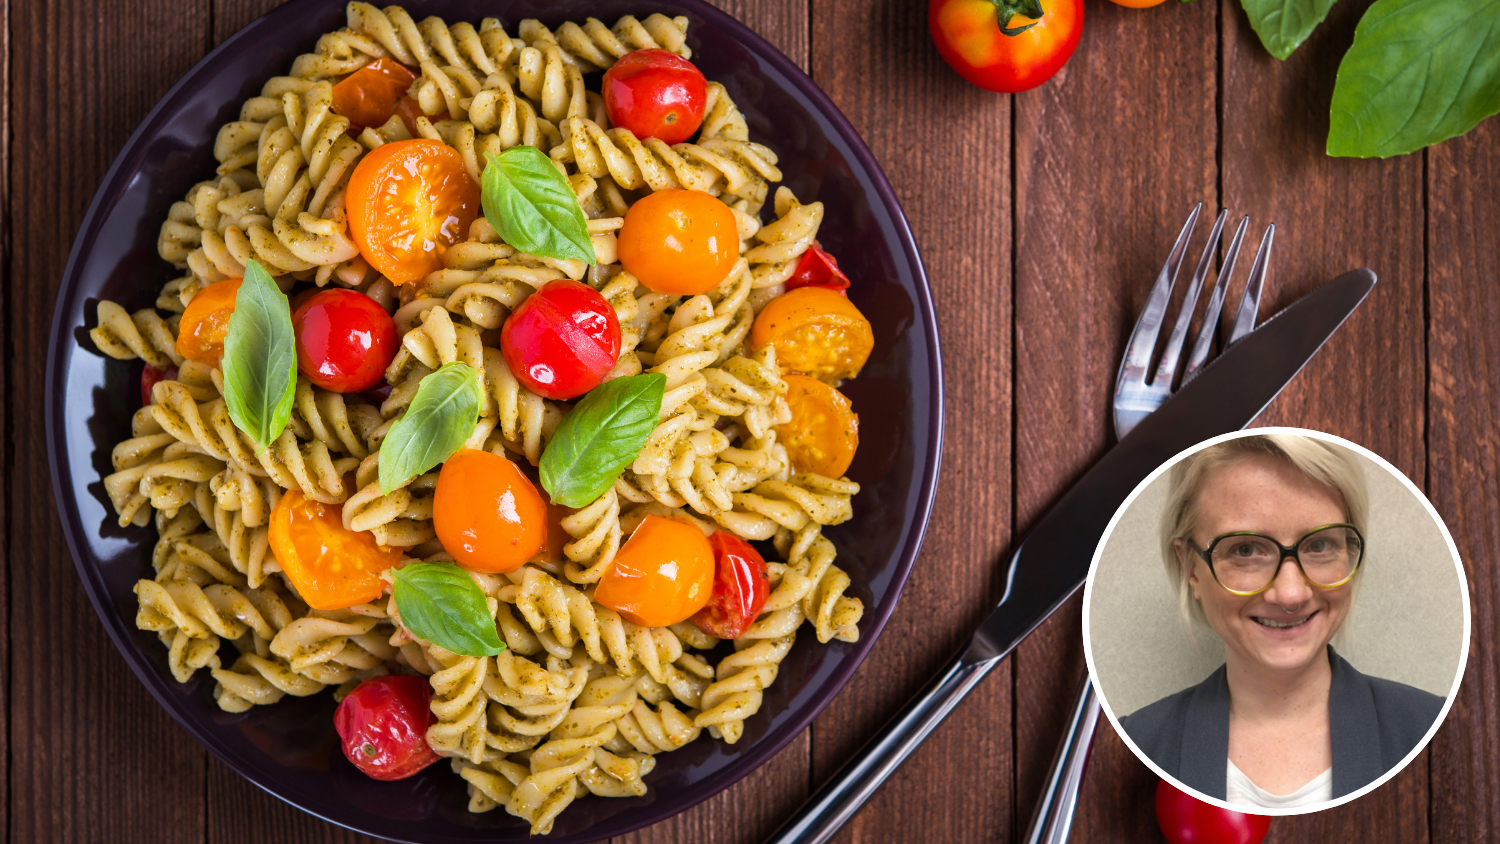 Image for Virtual Class – Budget Cooking: Summery Pasta Salad